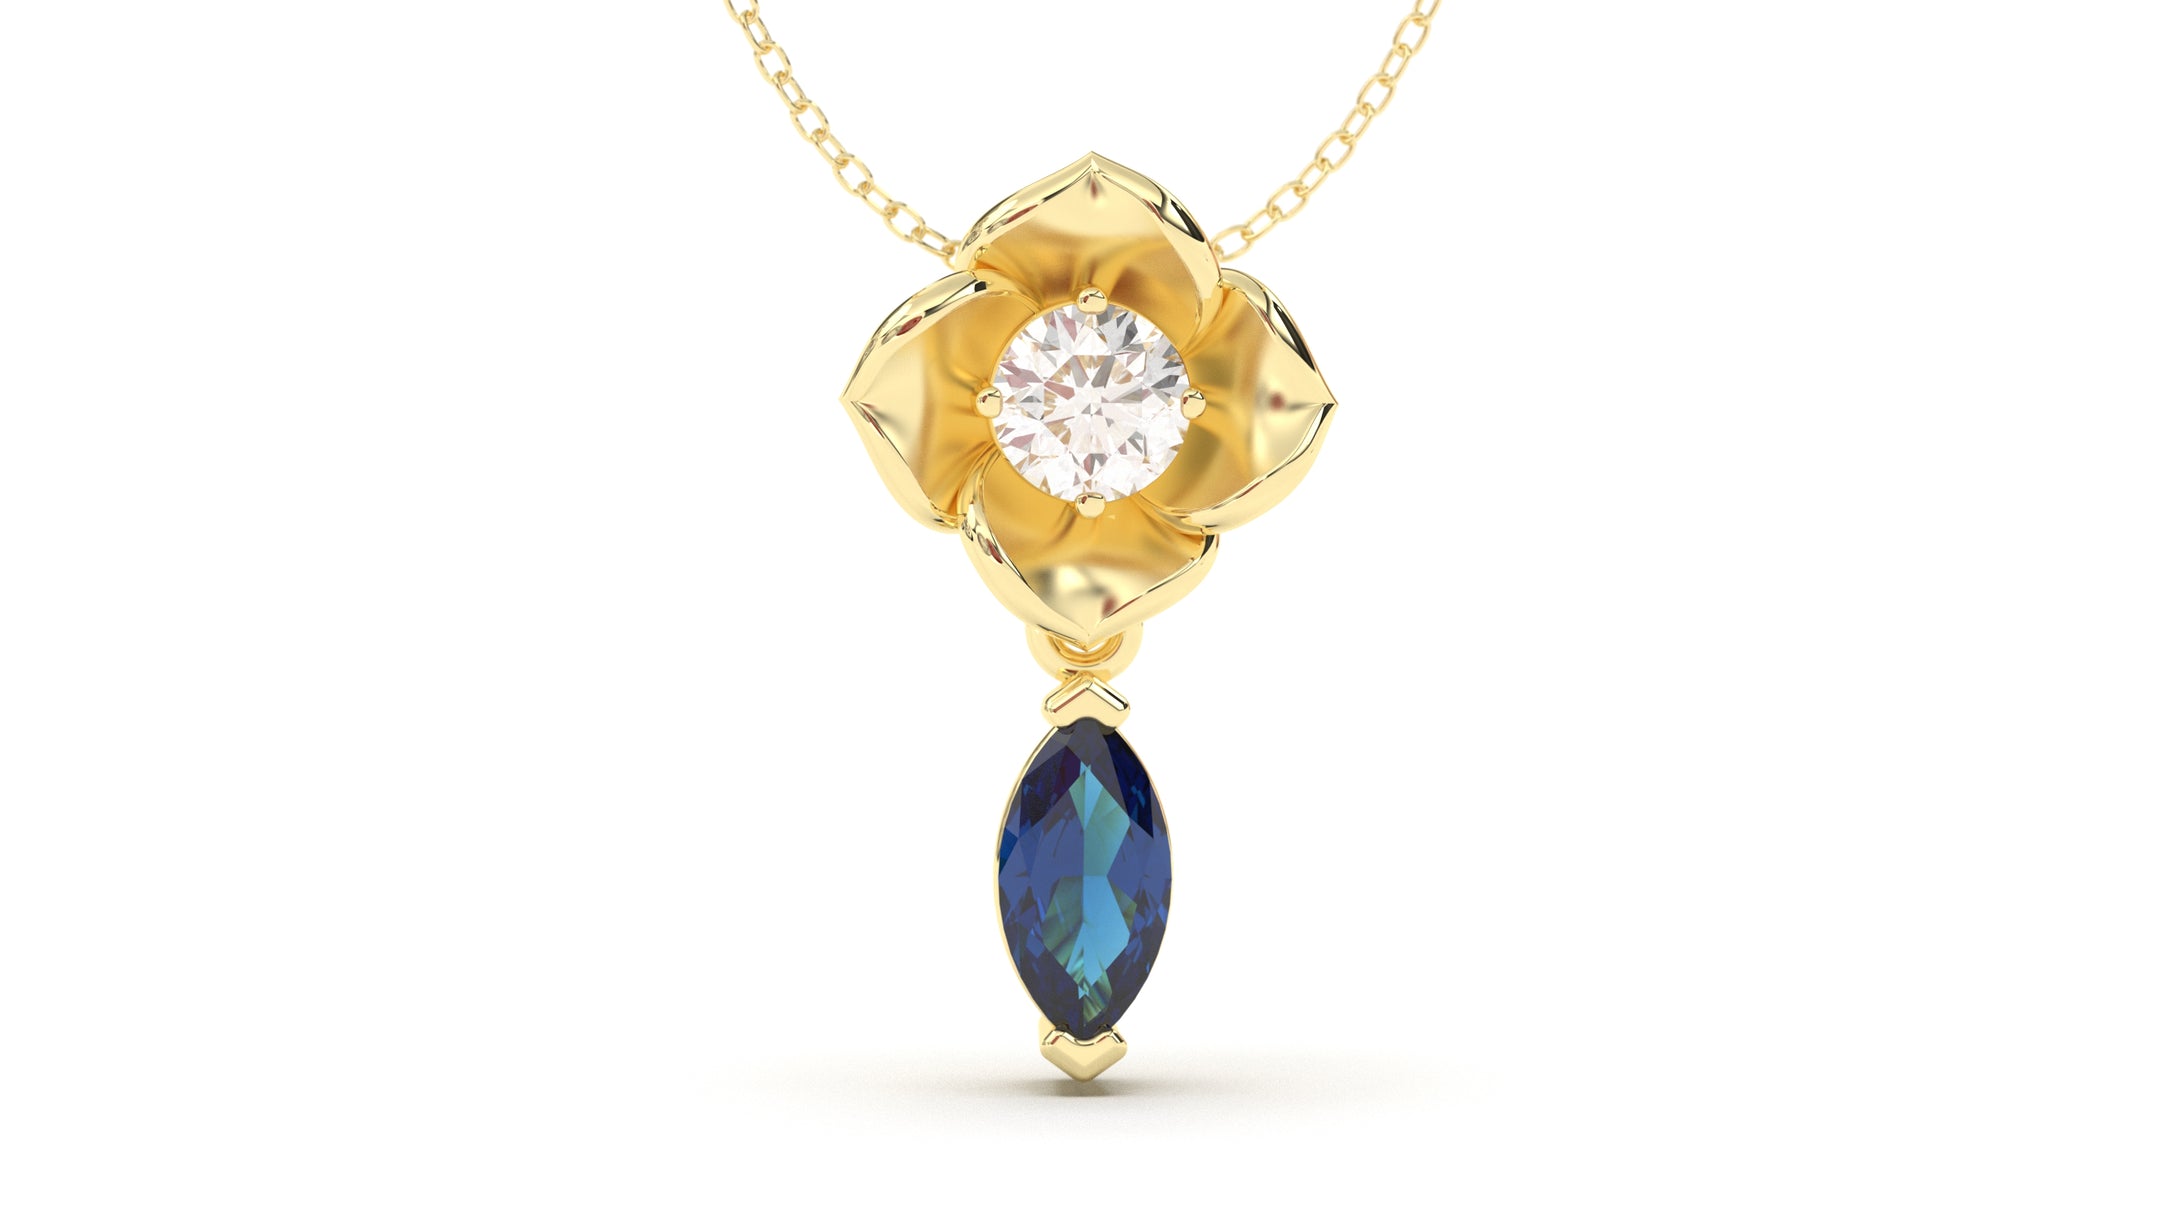 Pendant Flower Theme with Single Round White Diamond and Marquise Blue Sapphire | Bloom Flora XIV